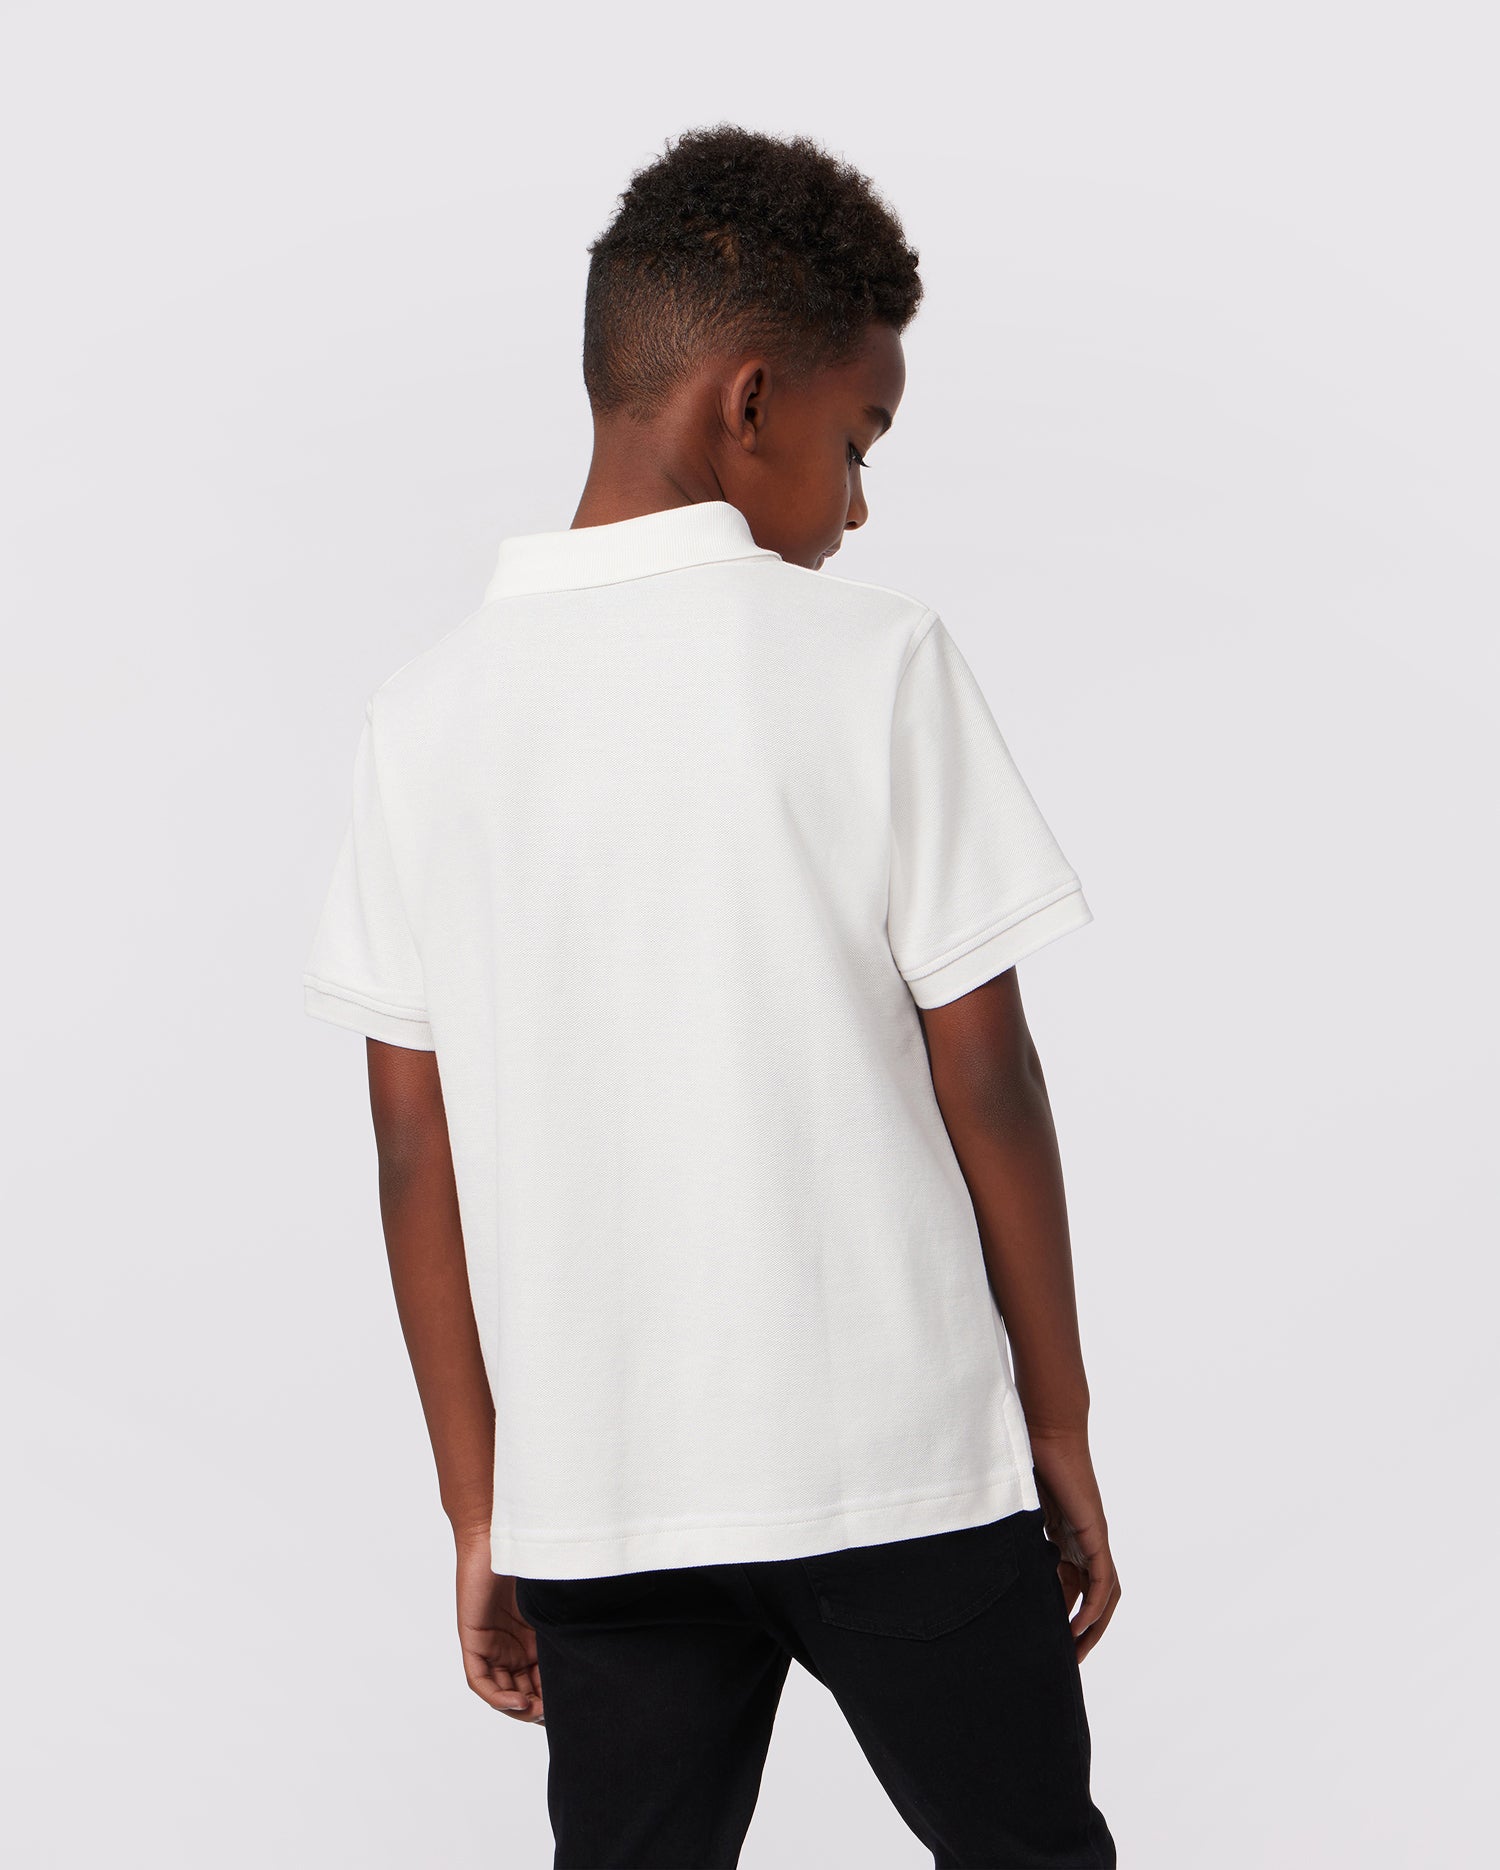 KIDS WHITE BEAUMONT PIQUE POLO | PSYCHO BUNNY – Psycho Bunny